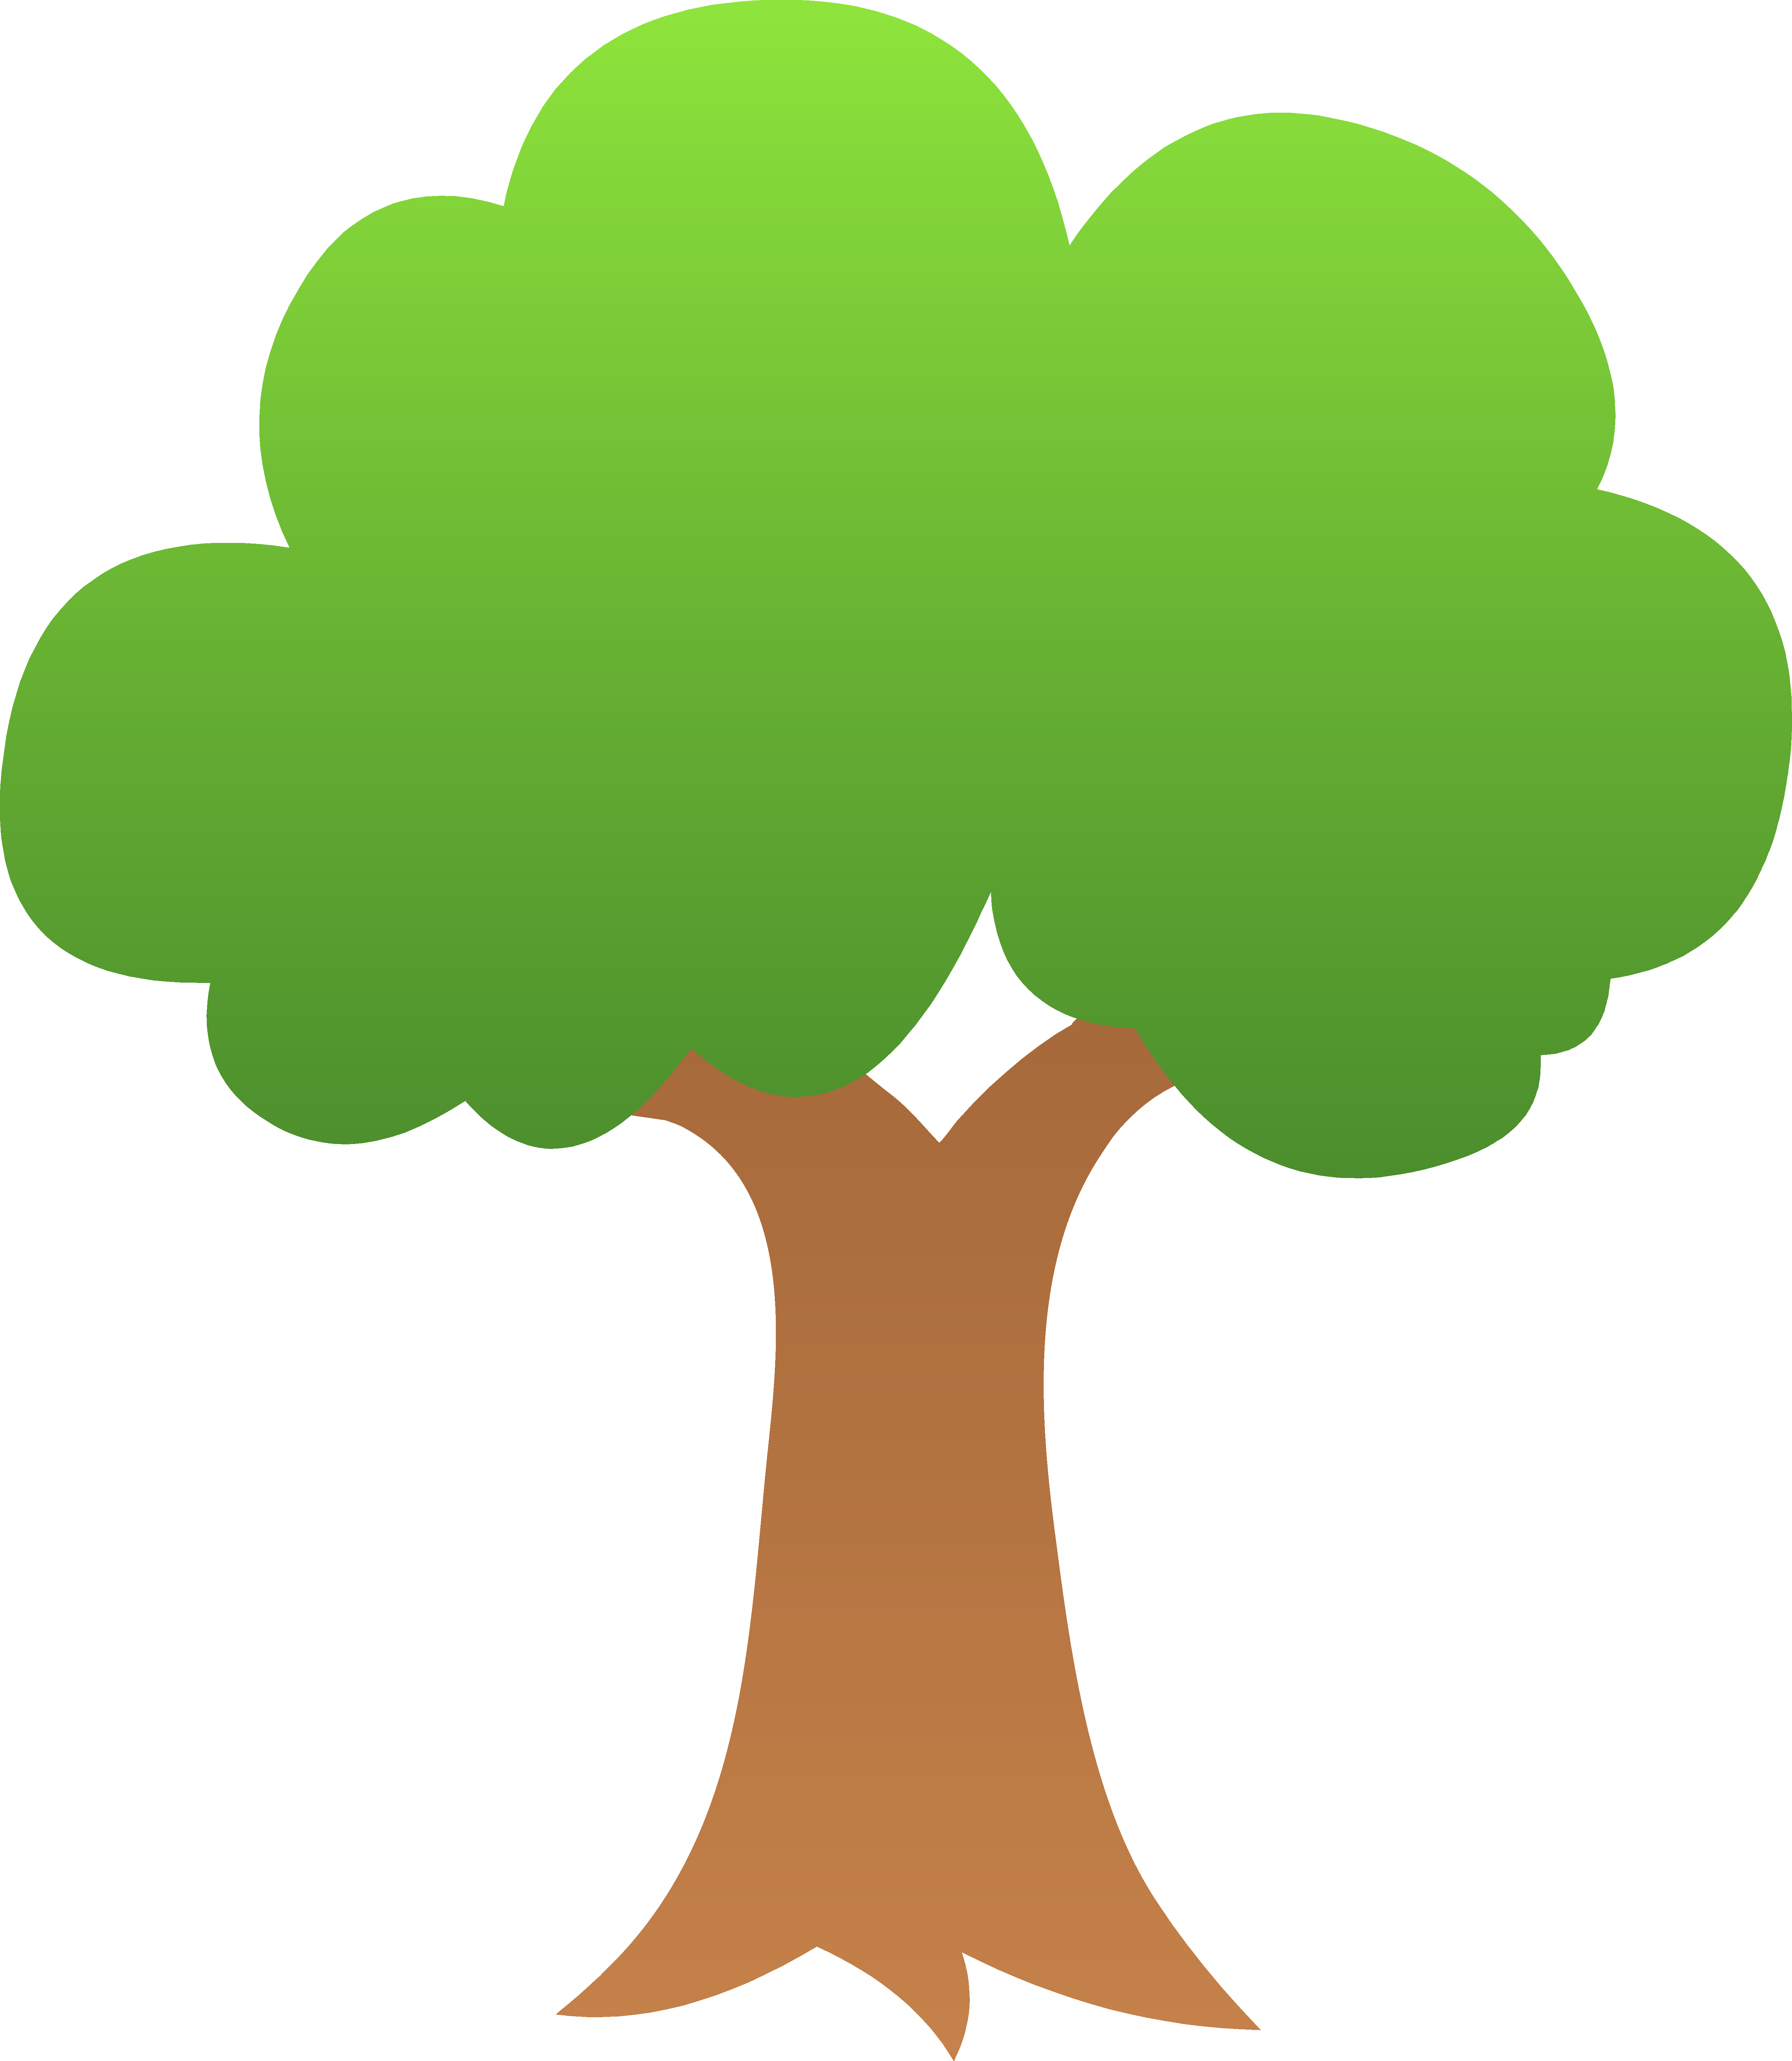 Tree community foundation for. Clipart trees colour